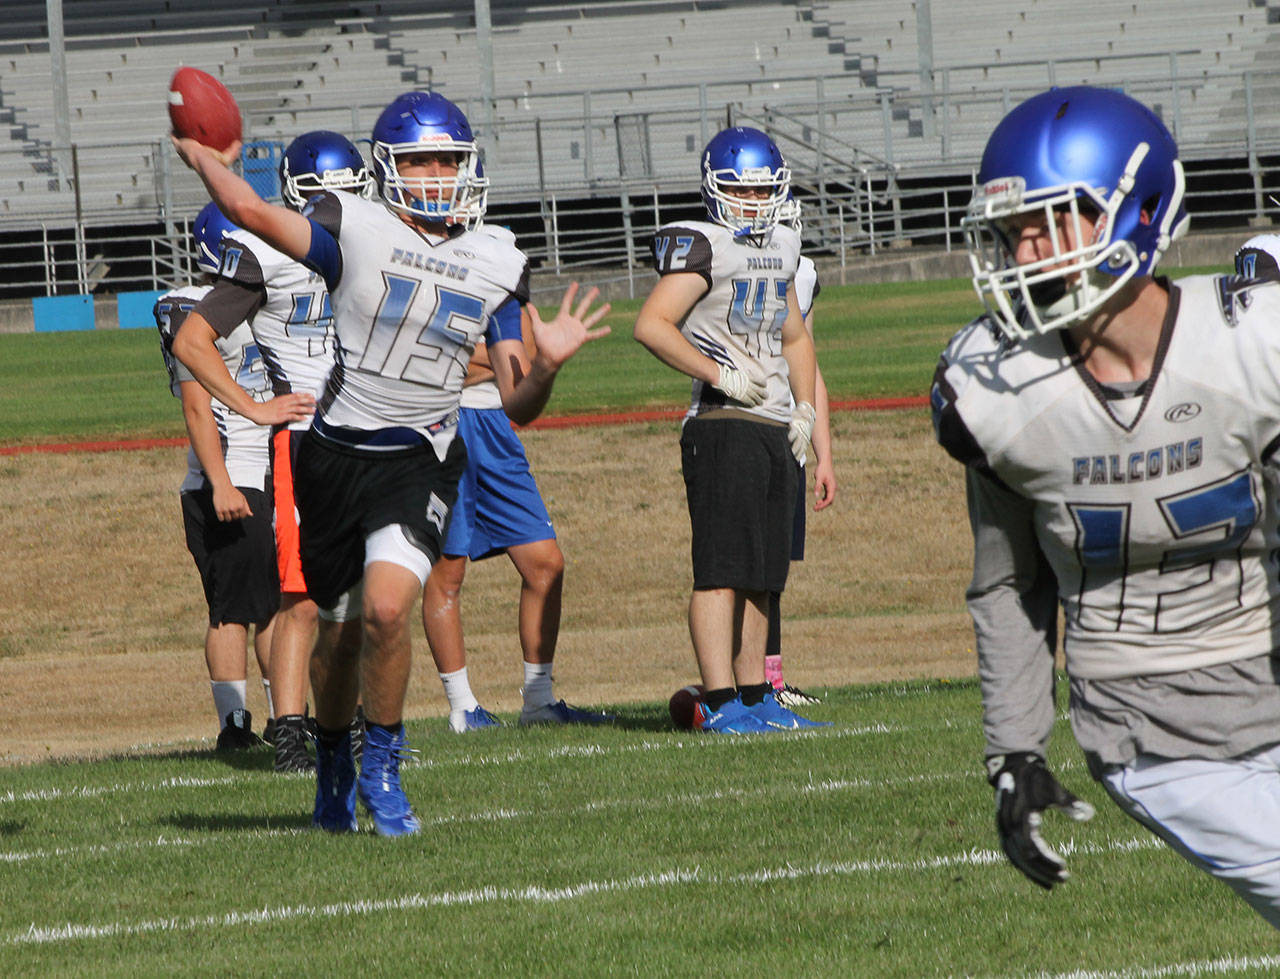 Quarterback Kole Nelson throws a pass during practice Thursday. The Falcon football team started Wedensday; the other South Whidbey sports begin Monday, Aug. 26. (Photo by Jim Waller/South Whidbey Record)